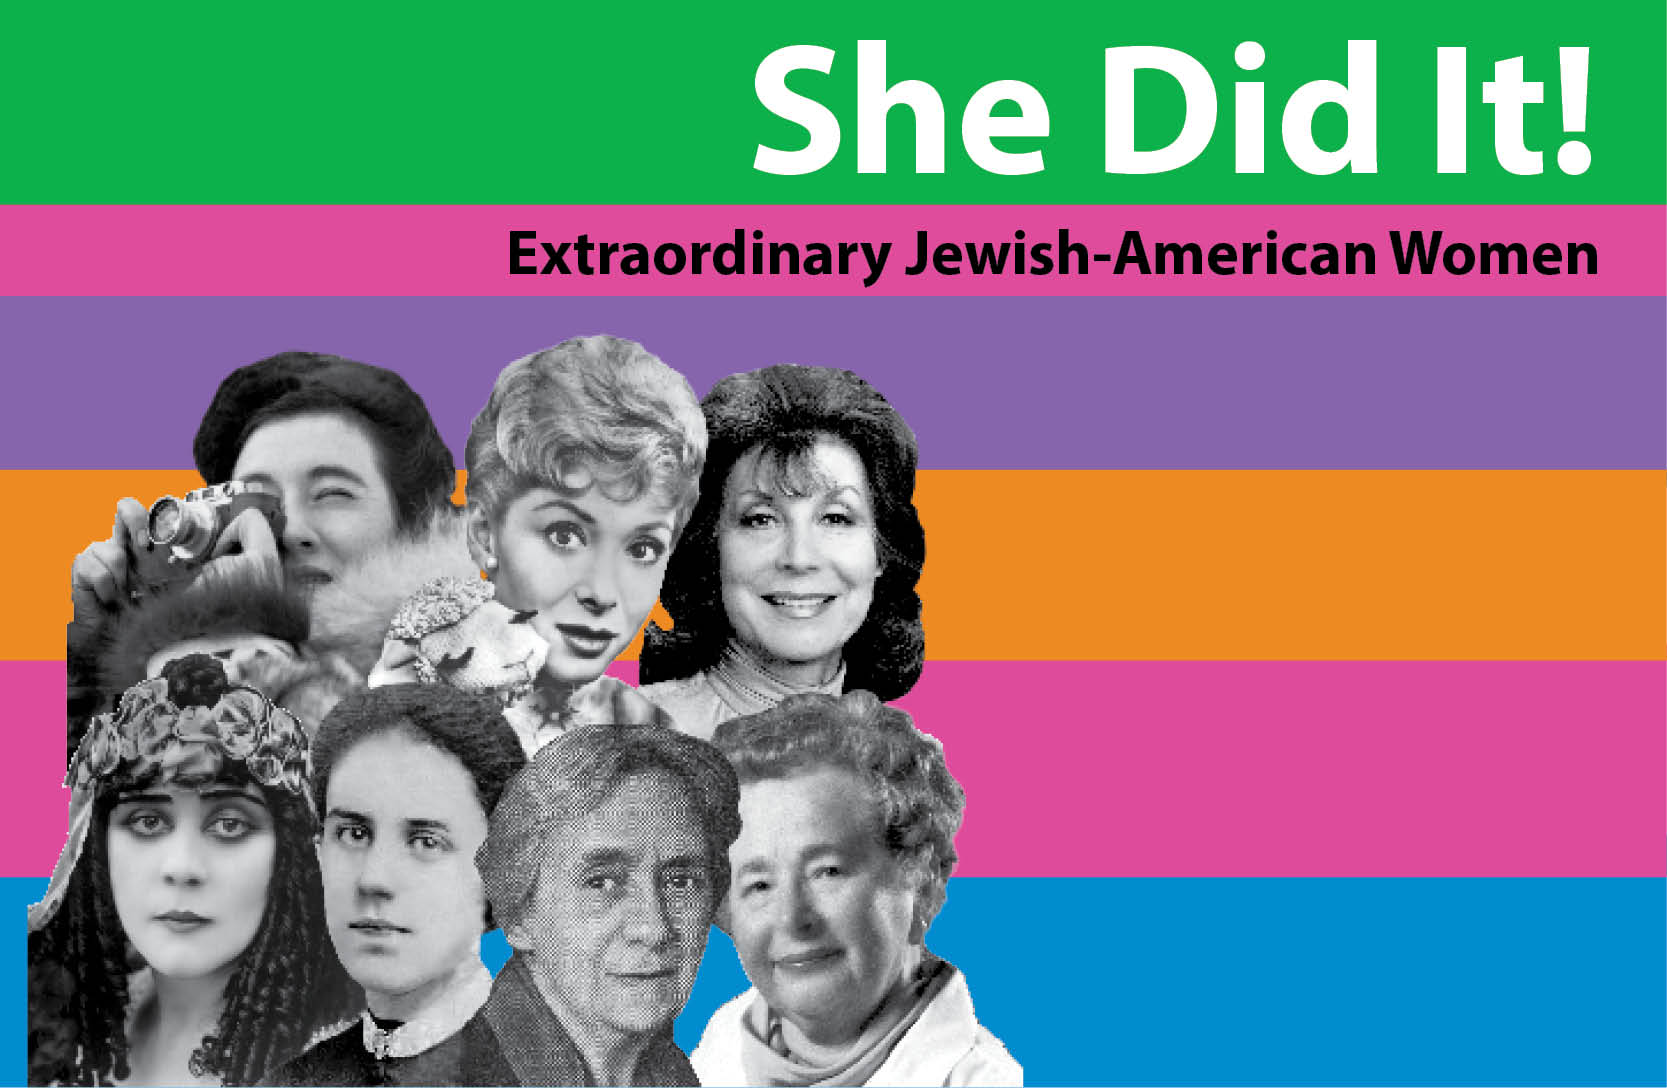 Gallery Opening: "She Did It!"